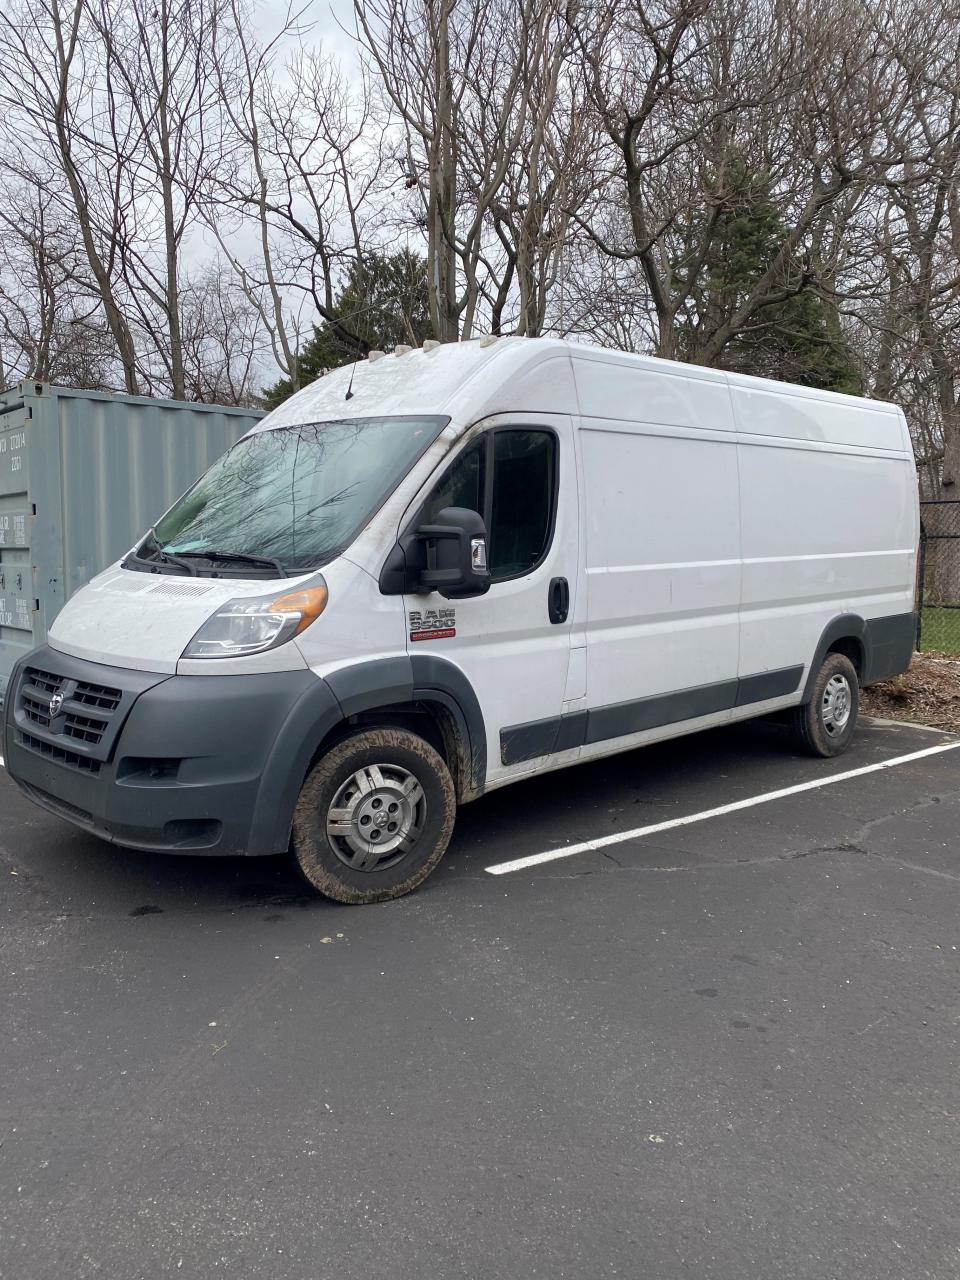 The van where Indy Steelers coach Richard Donnell Hamilton died sits in the parking lot of the Martin Luther King Community Center. Coach Nell, as he was known to members of the youth football program, was shot during a road rage incident on Jan. 11, 2023, according to Indiana State Police.